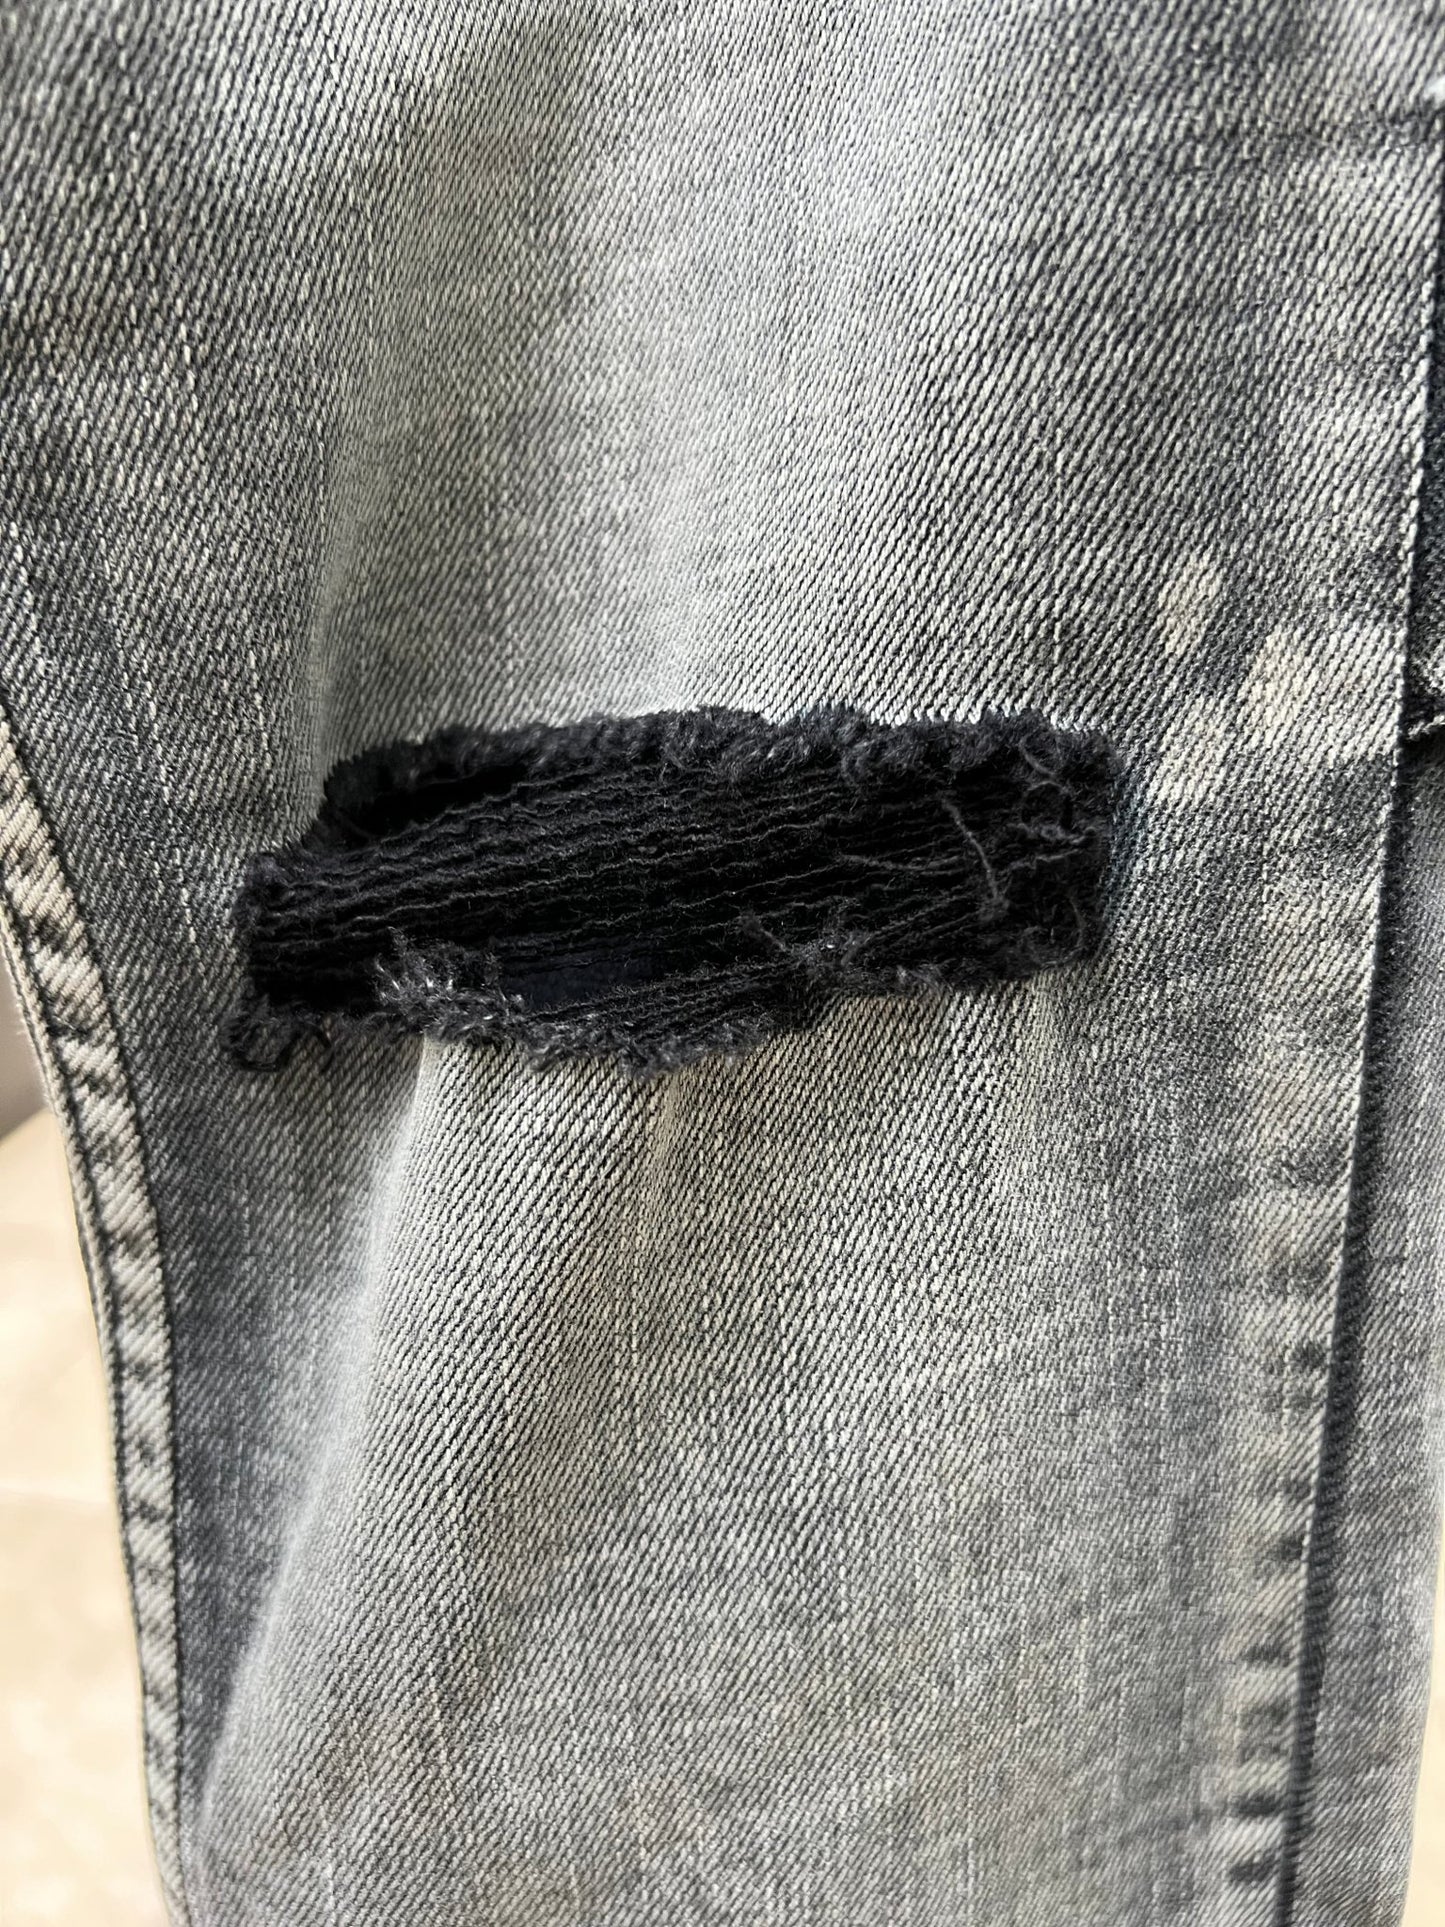 A close up of a pair of men's KSUBI CHITCH HYPNOTIZE TRASHED DENIM jeans with a hole in them.